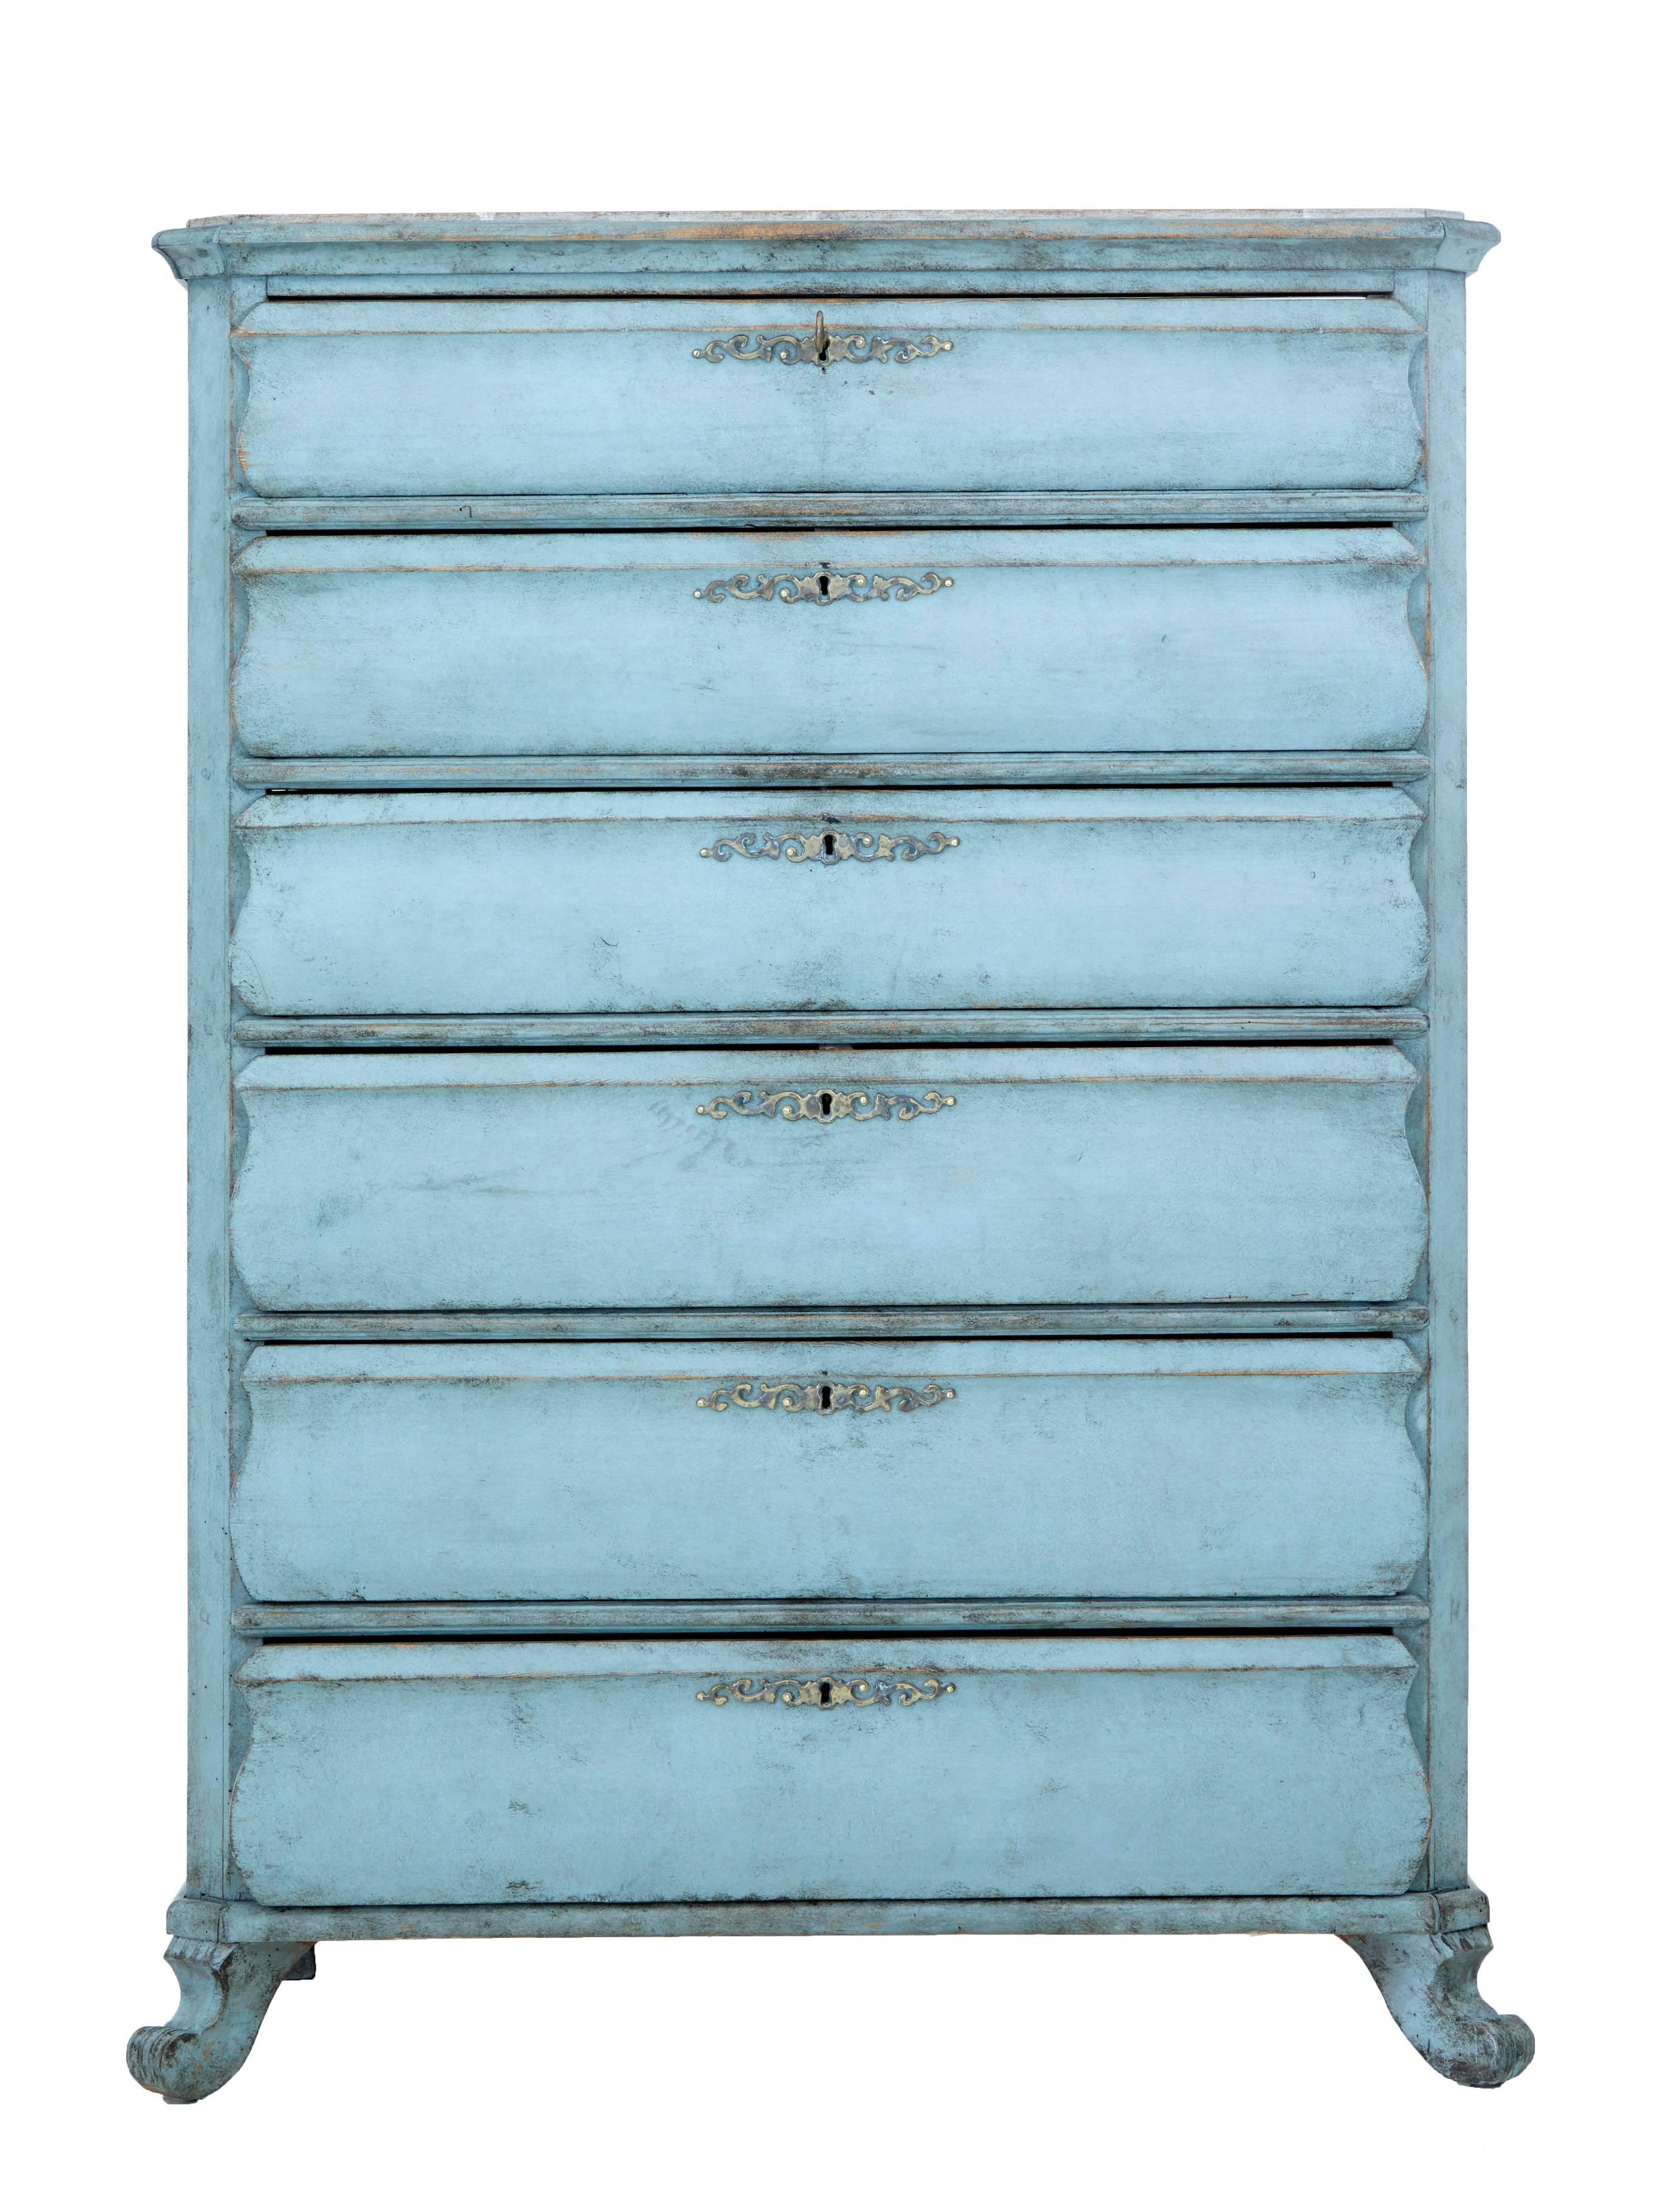 Six-drawer pine tall boy chest of drawers, circa 1870.
Shaped front drawers that open on the key.
Faux marble painted top, with later distressed paint in typical Swedish colors.
Scrolling feet to the front and block feet to the back.

Some